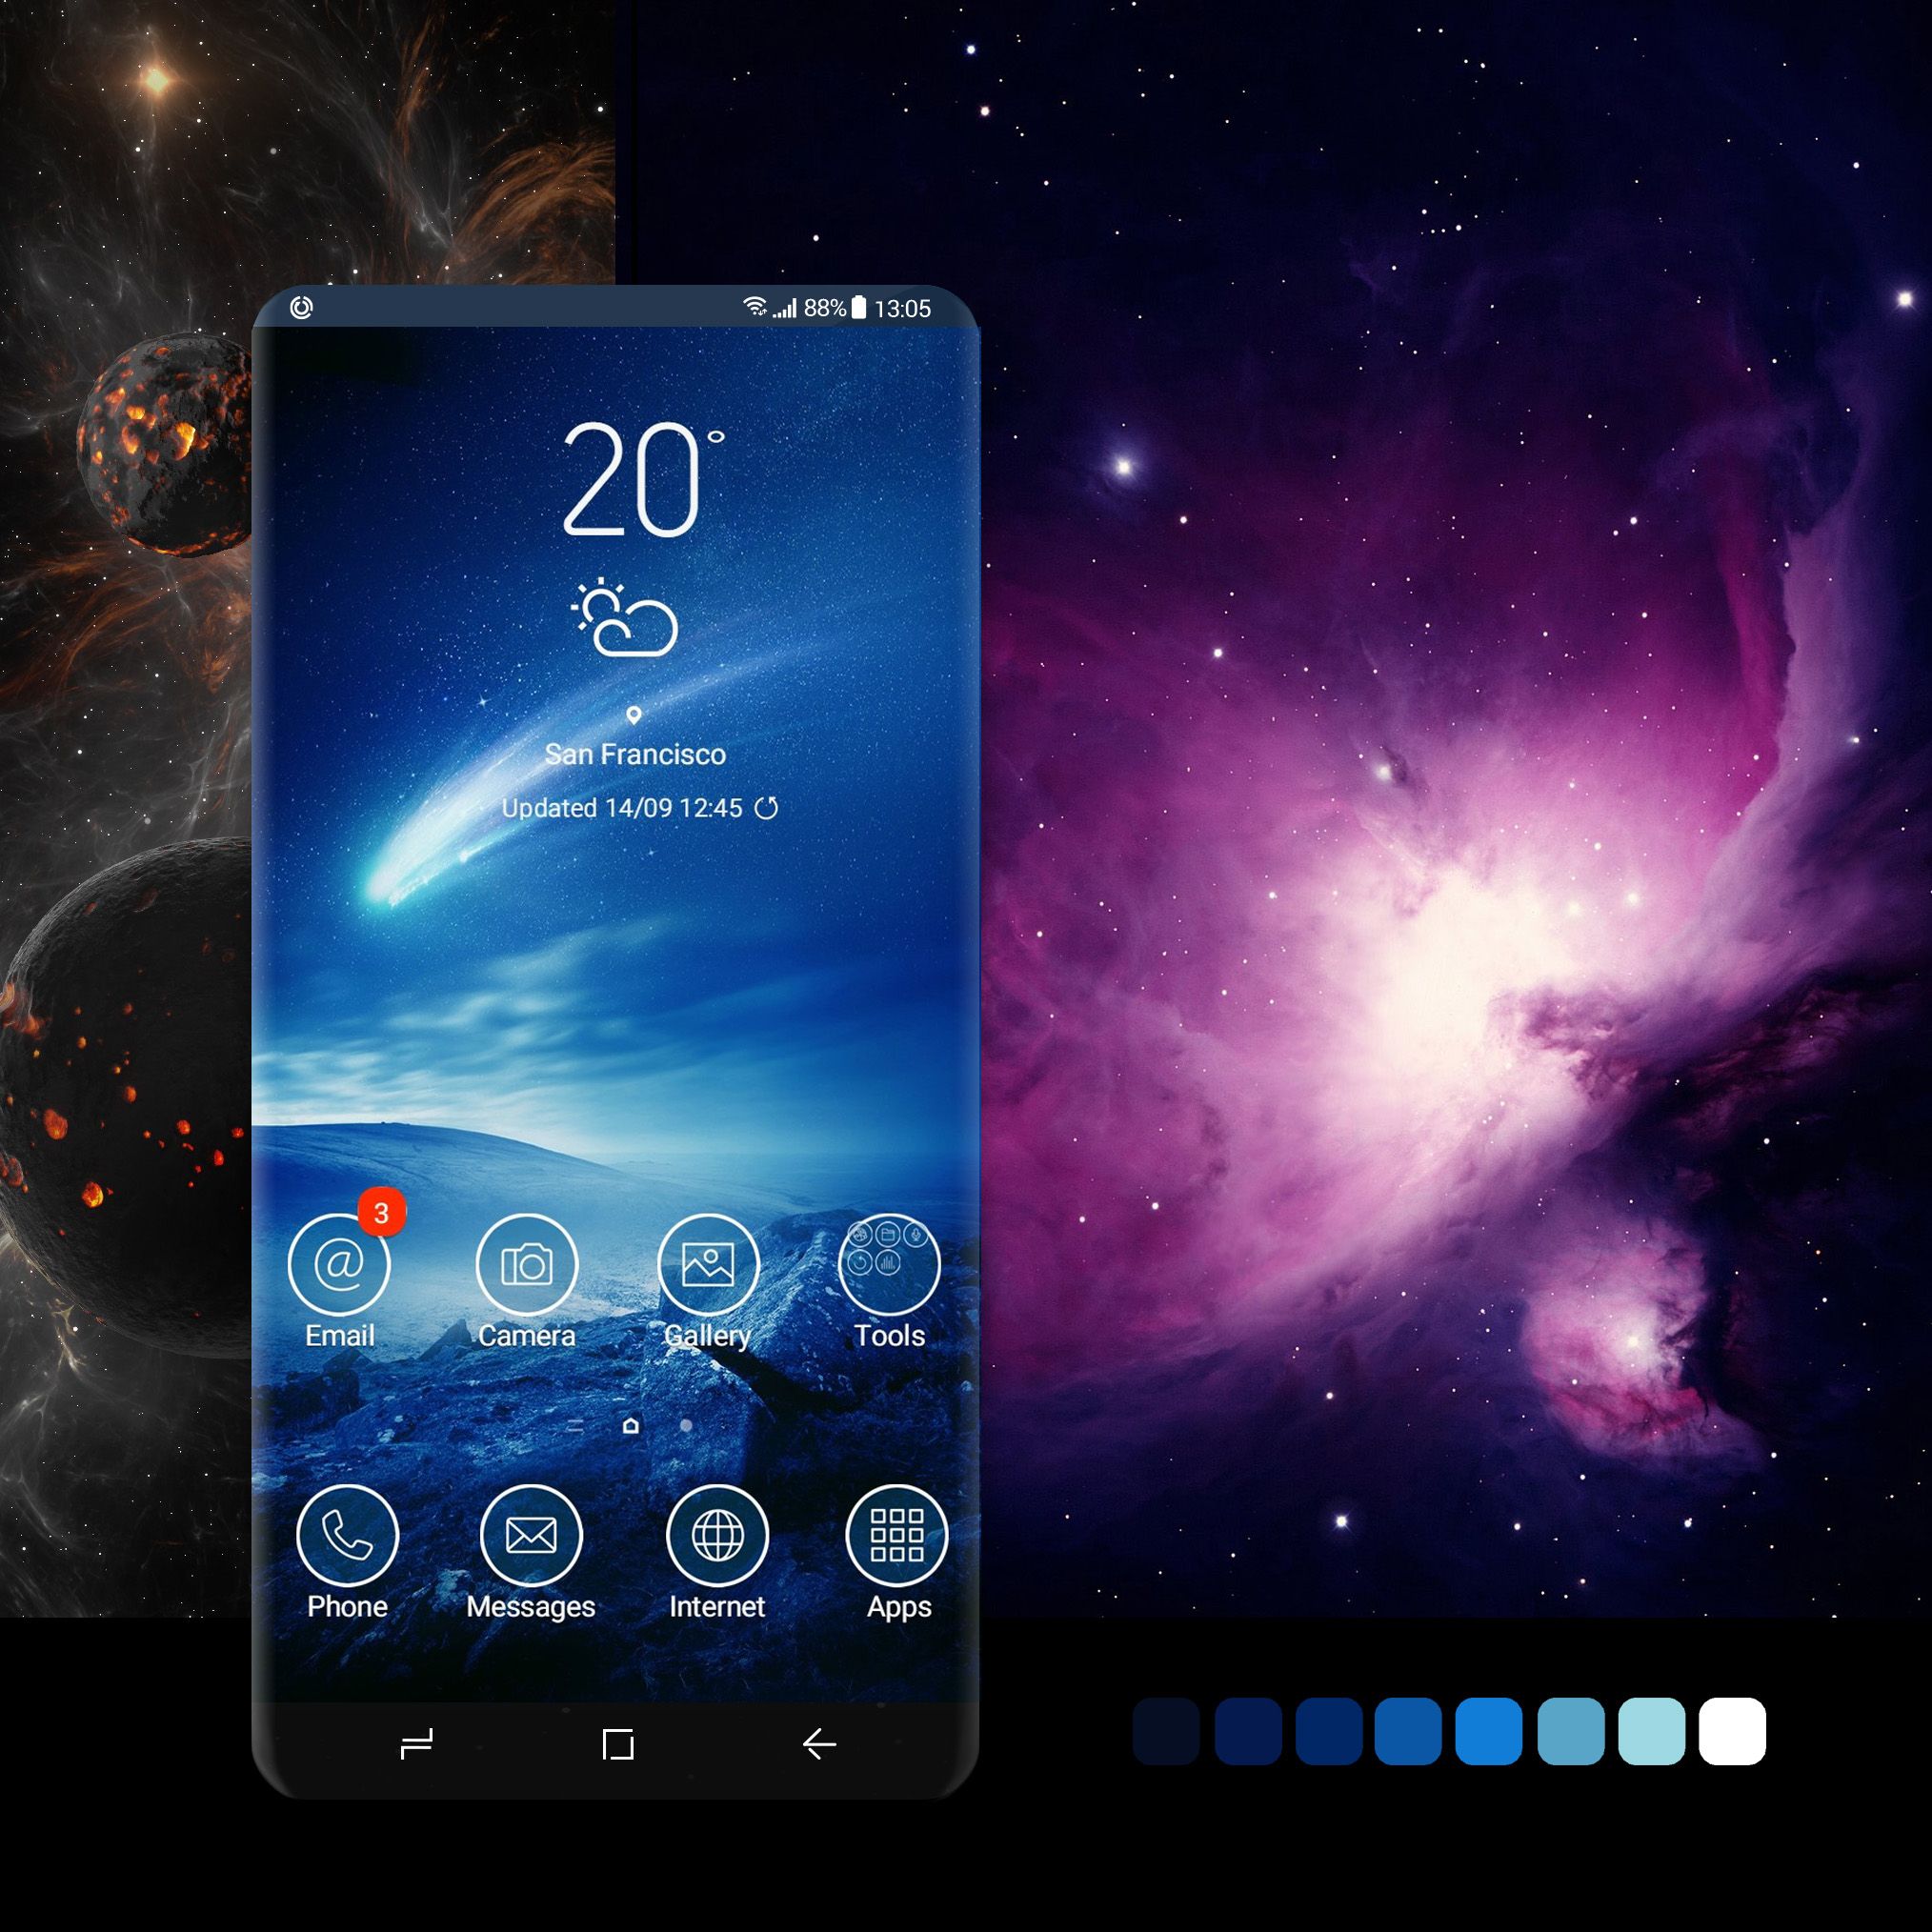 Shooting Star Theme Wallpaper Android Phone Smartphone